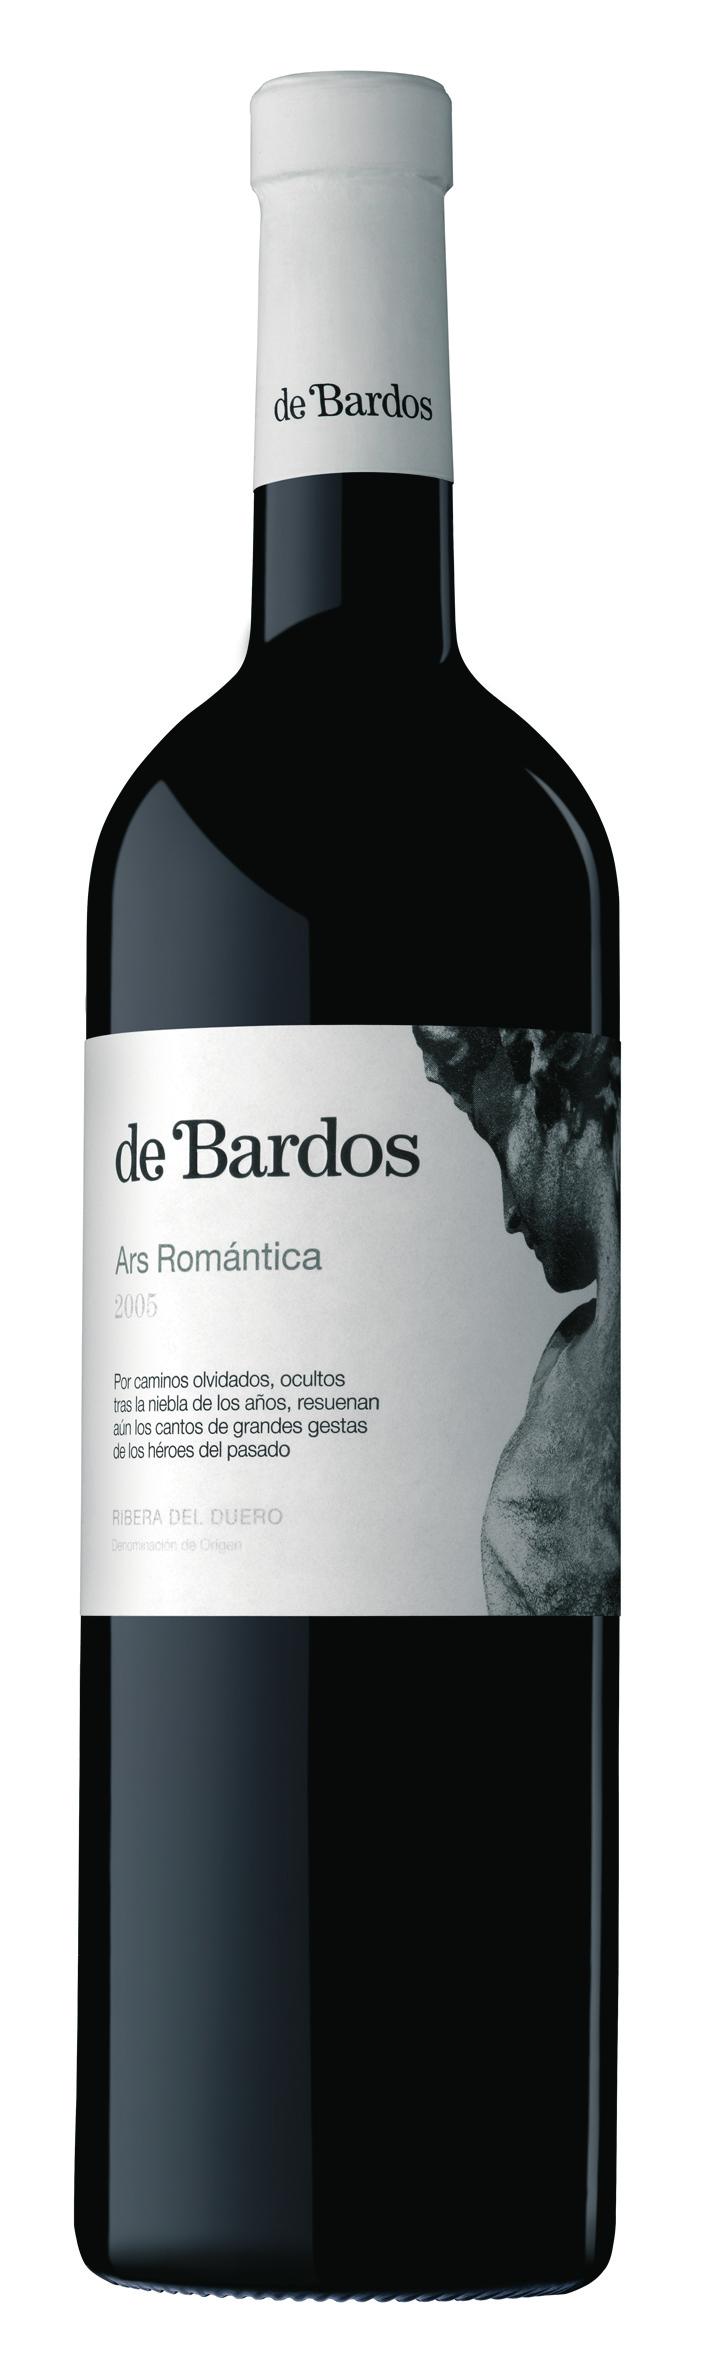 Ars Romántica is a modern Signature Wine which exhibits an extremely smooth and sweet personality, created from carefully selected grapes.